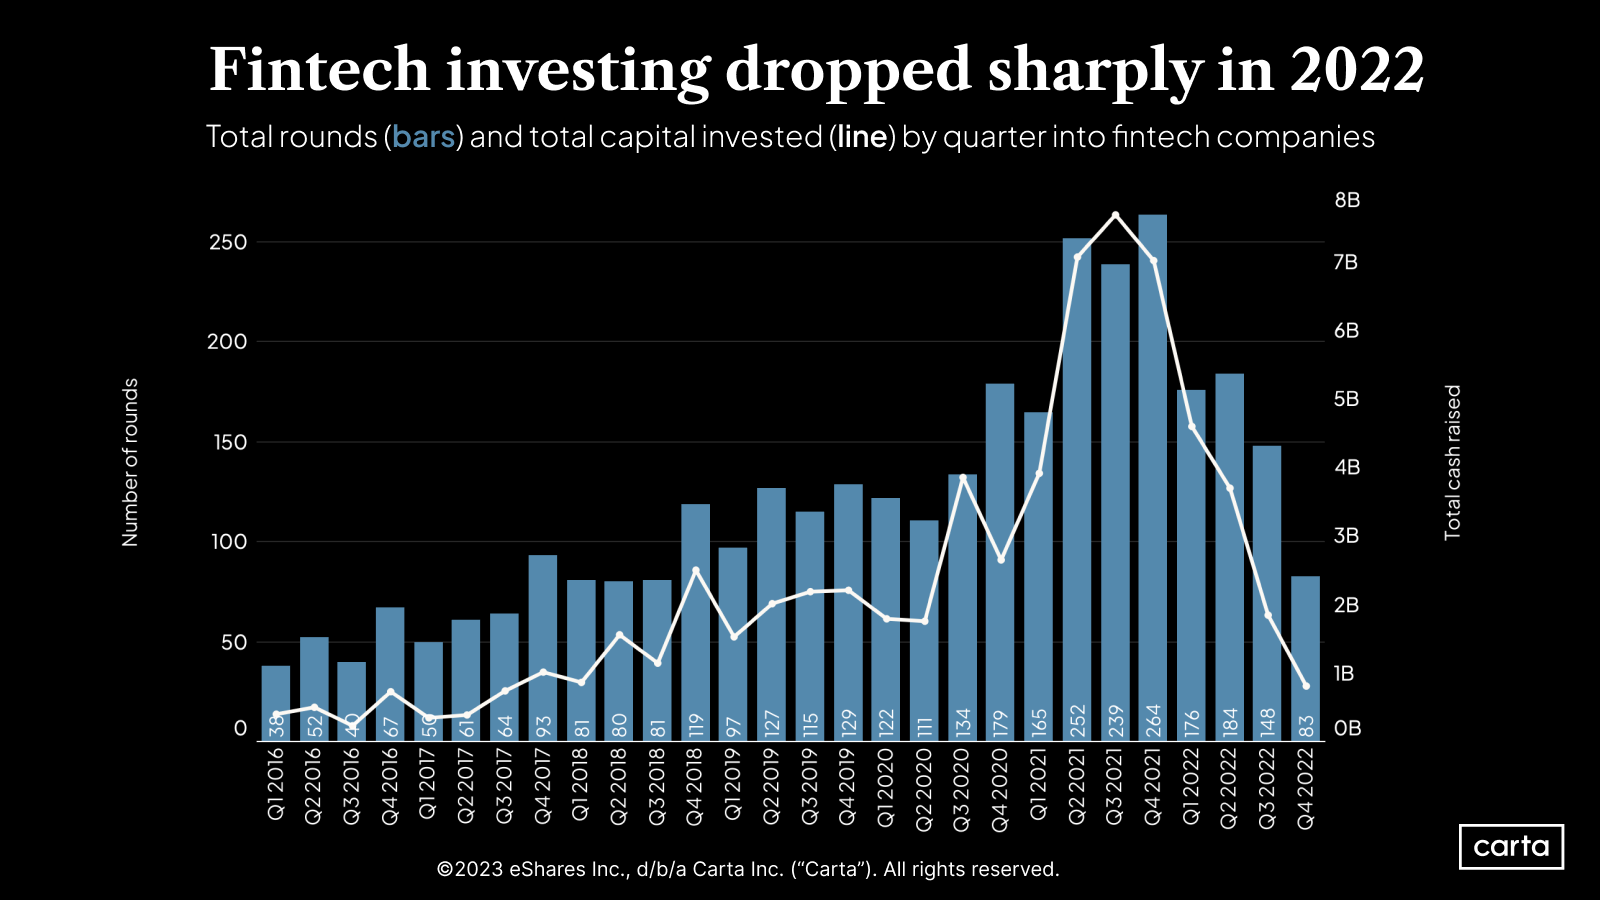 Bar chart shows total number of rounds and total capital invested by quarter for fintech companies on Carta with steep drop from Q4 2021 through Q4 2022.